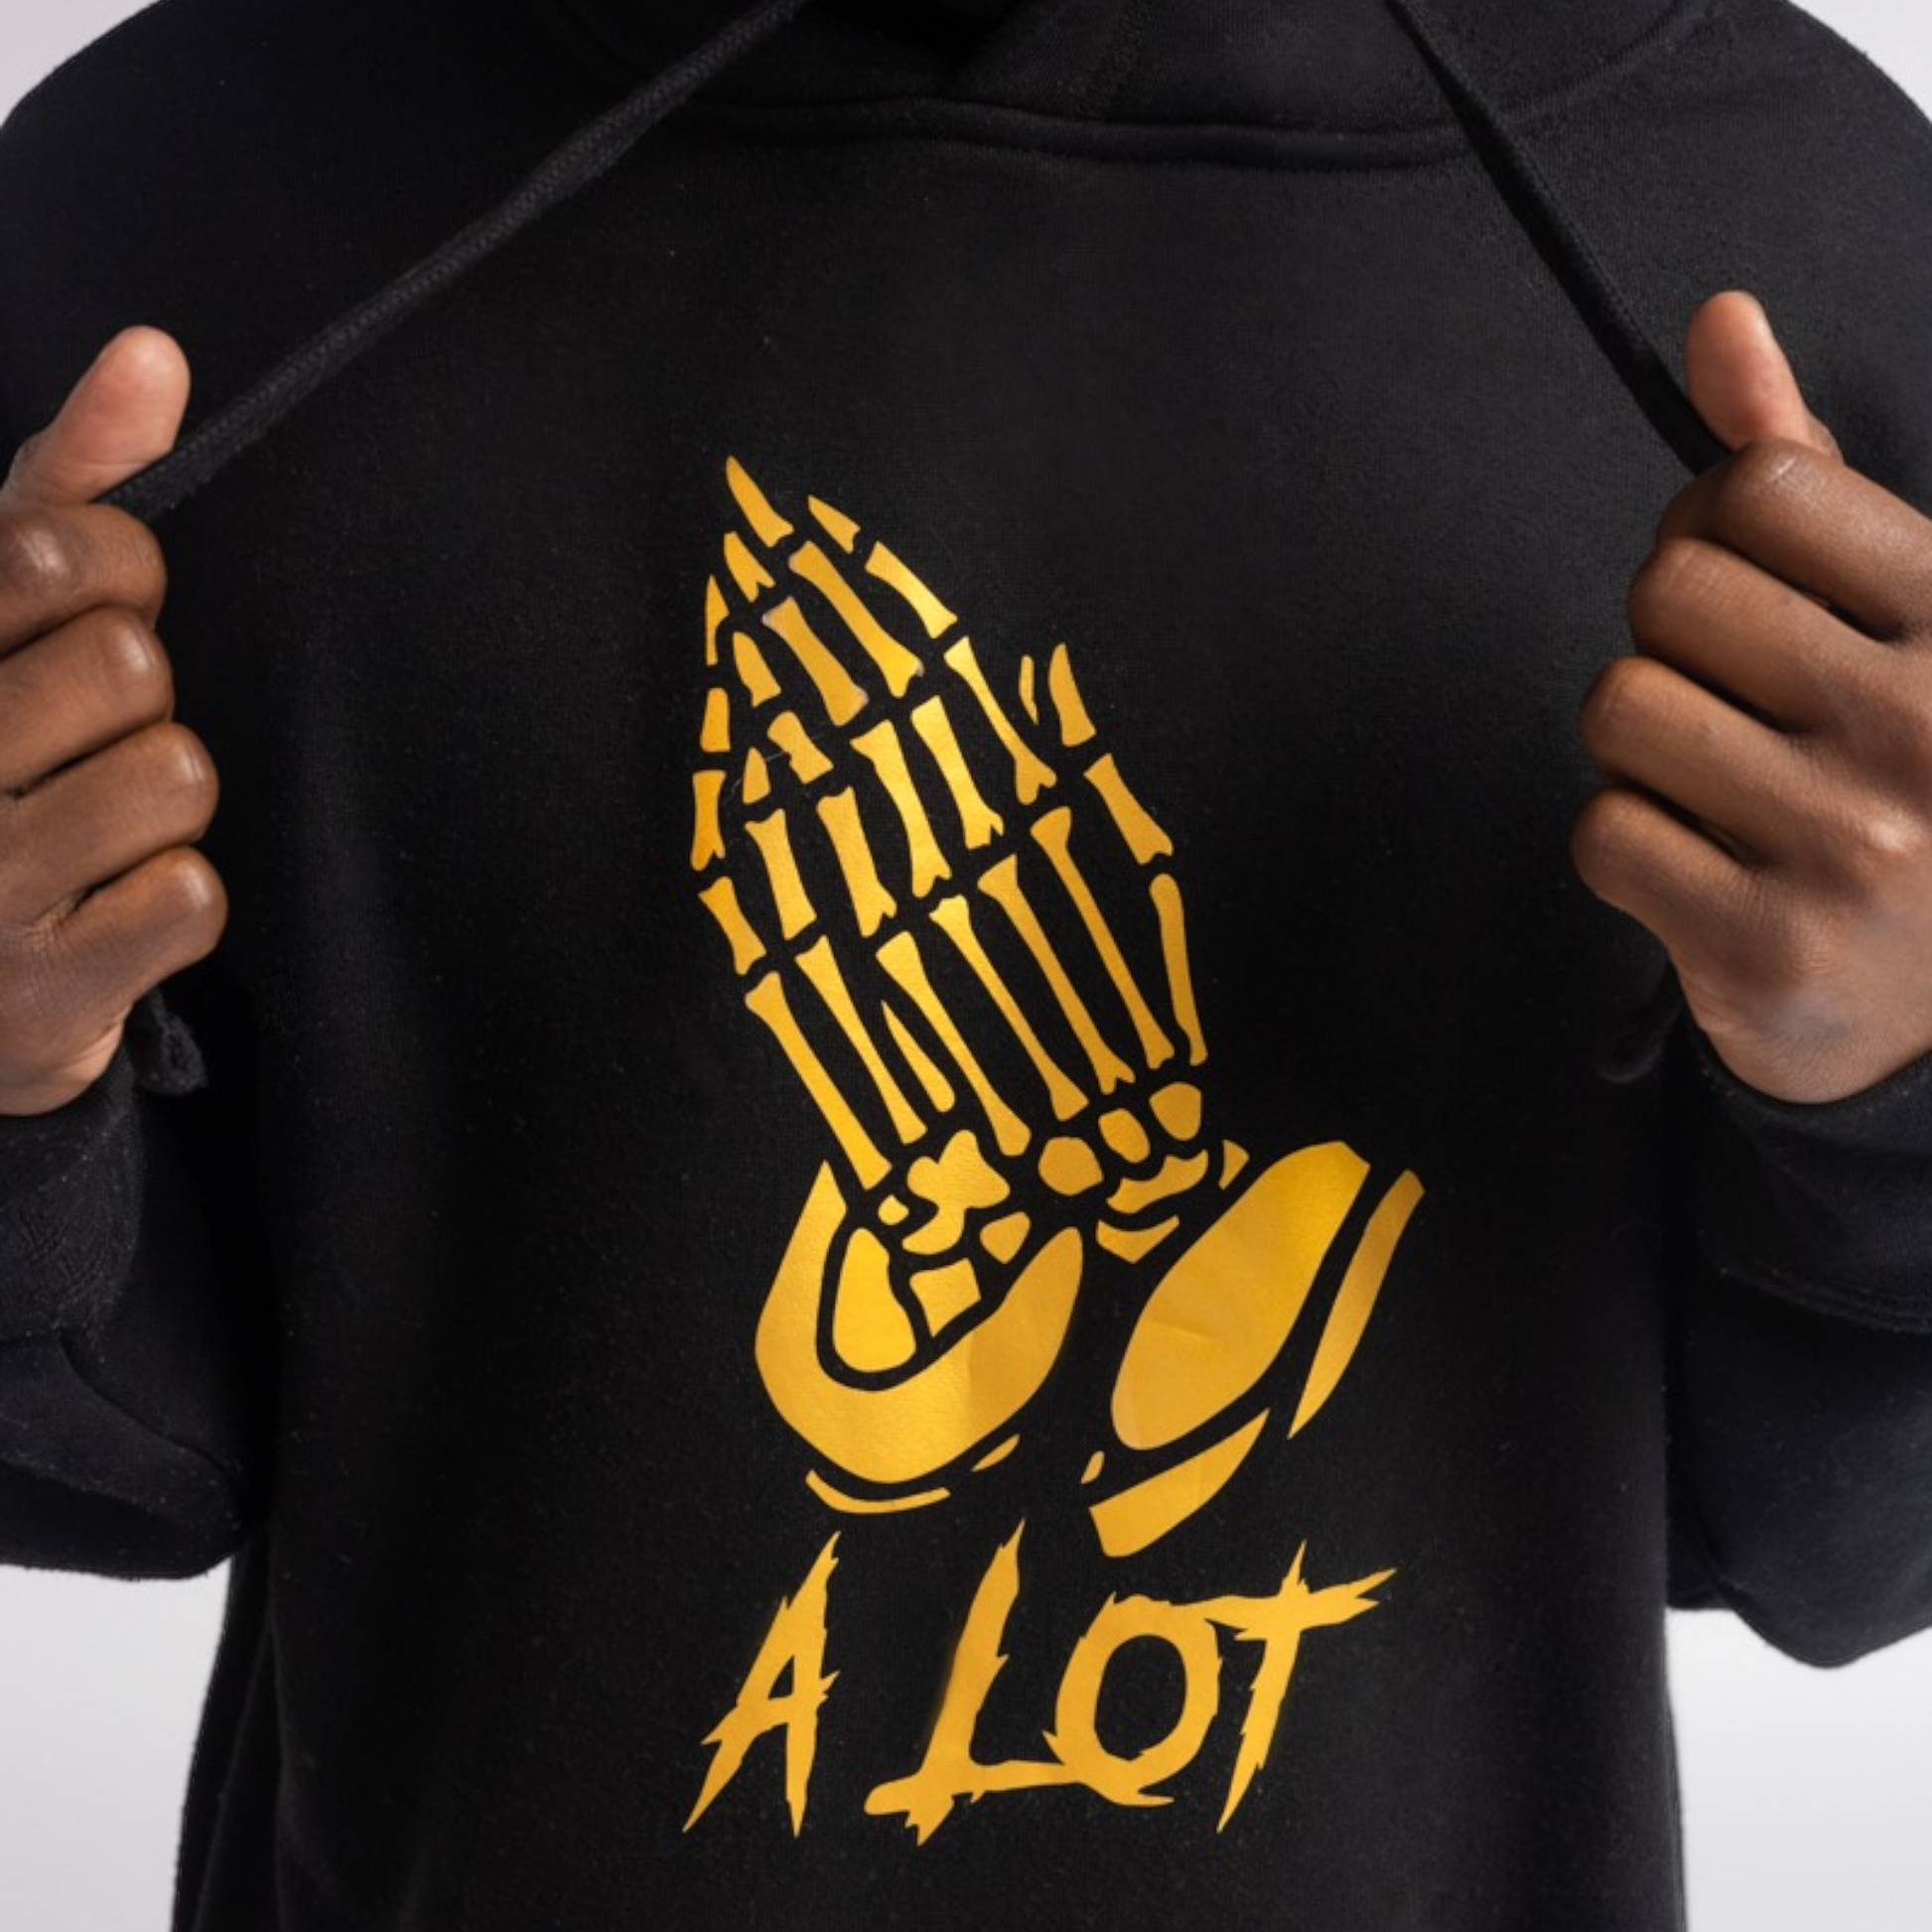 Golden metallic Design - PRAY A LOT Hoodie - men and women sizes - **Exclusive Limited Release - TheSinners2Saints